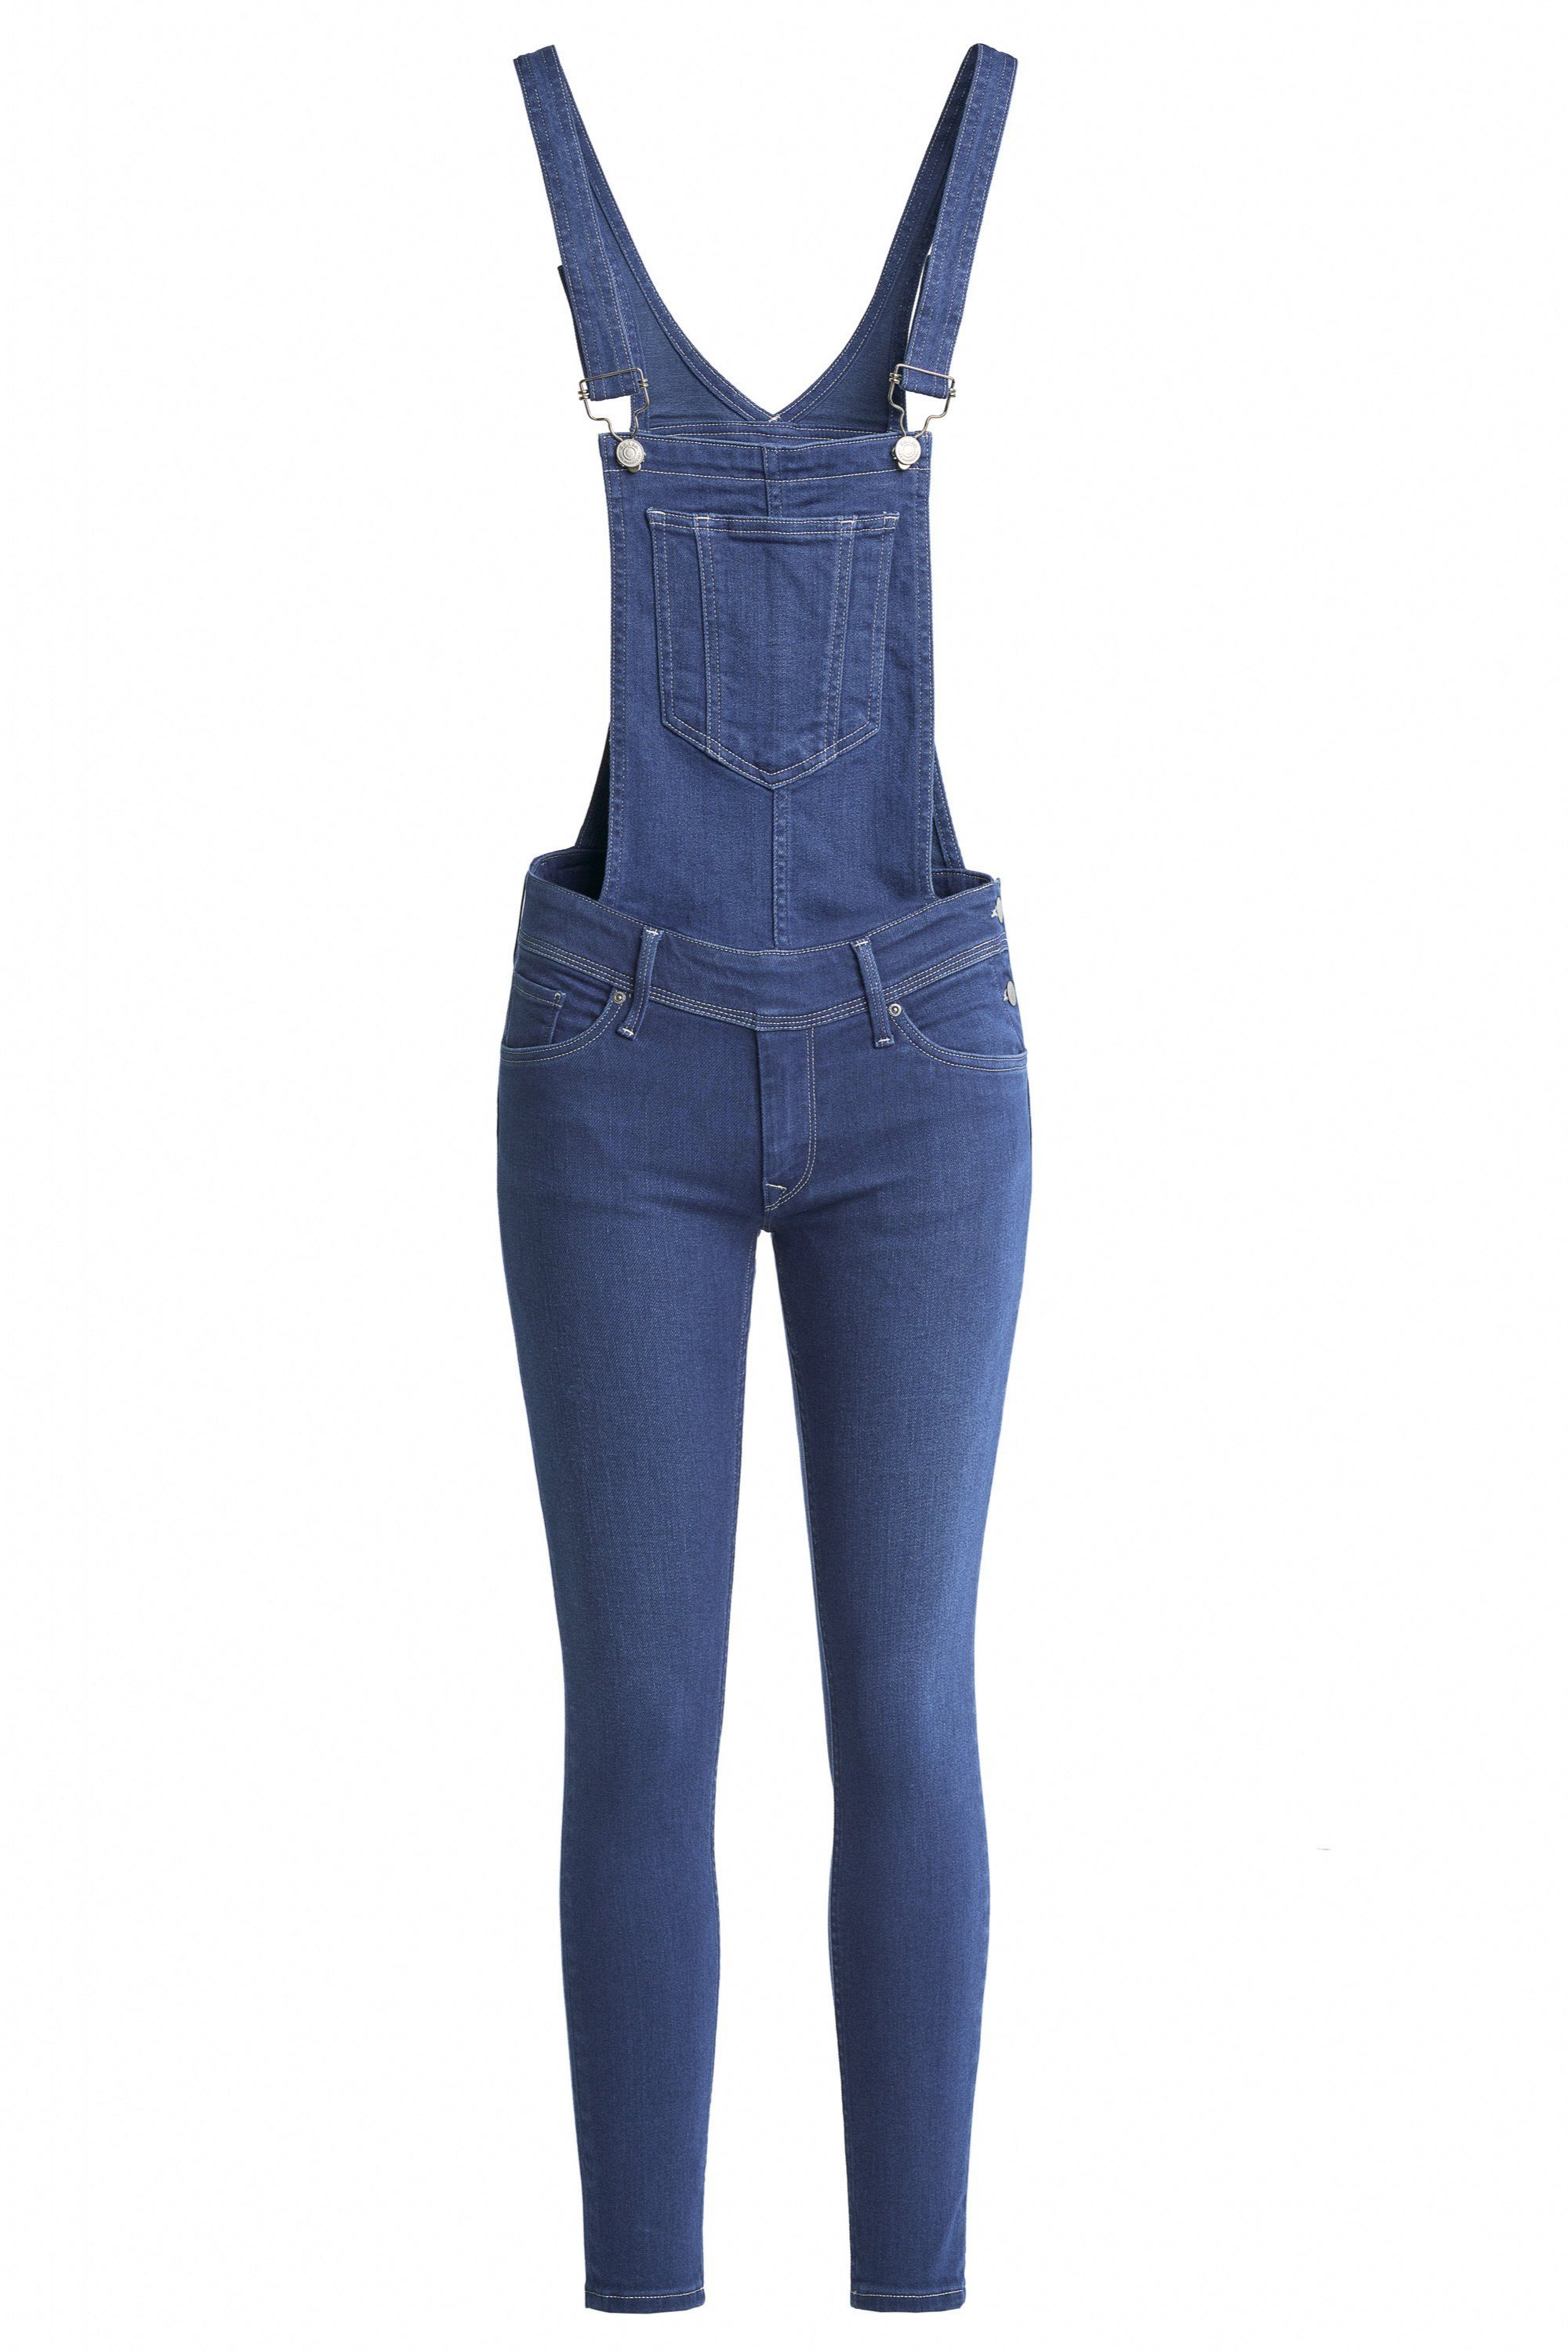 125181.8503 Salsa WONDER PUSH blue JEANS SALSA bright OVERALL Stretch-Jeans UP